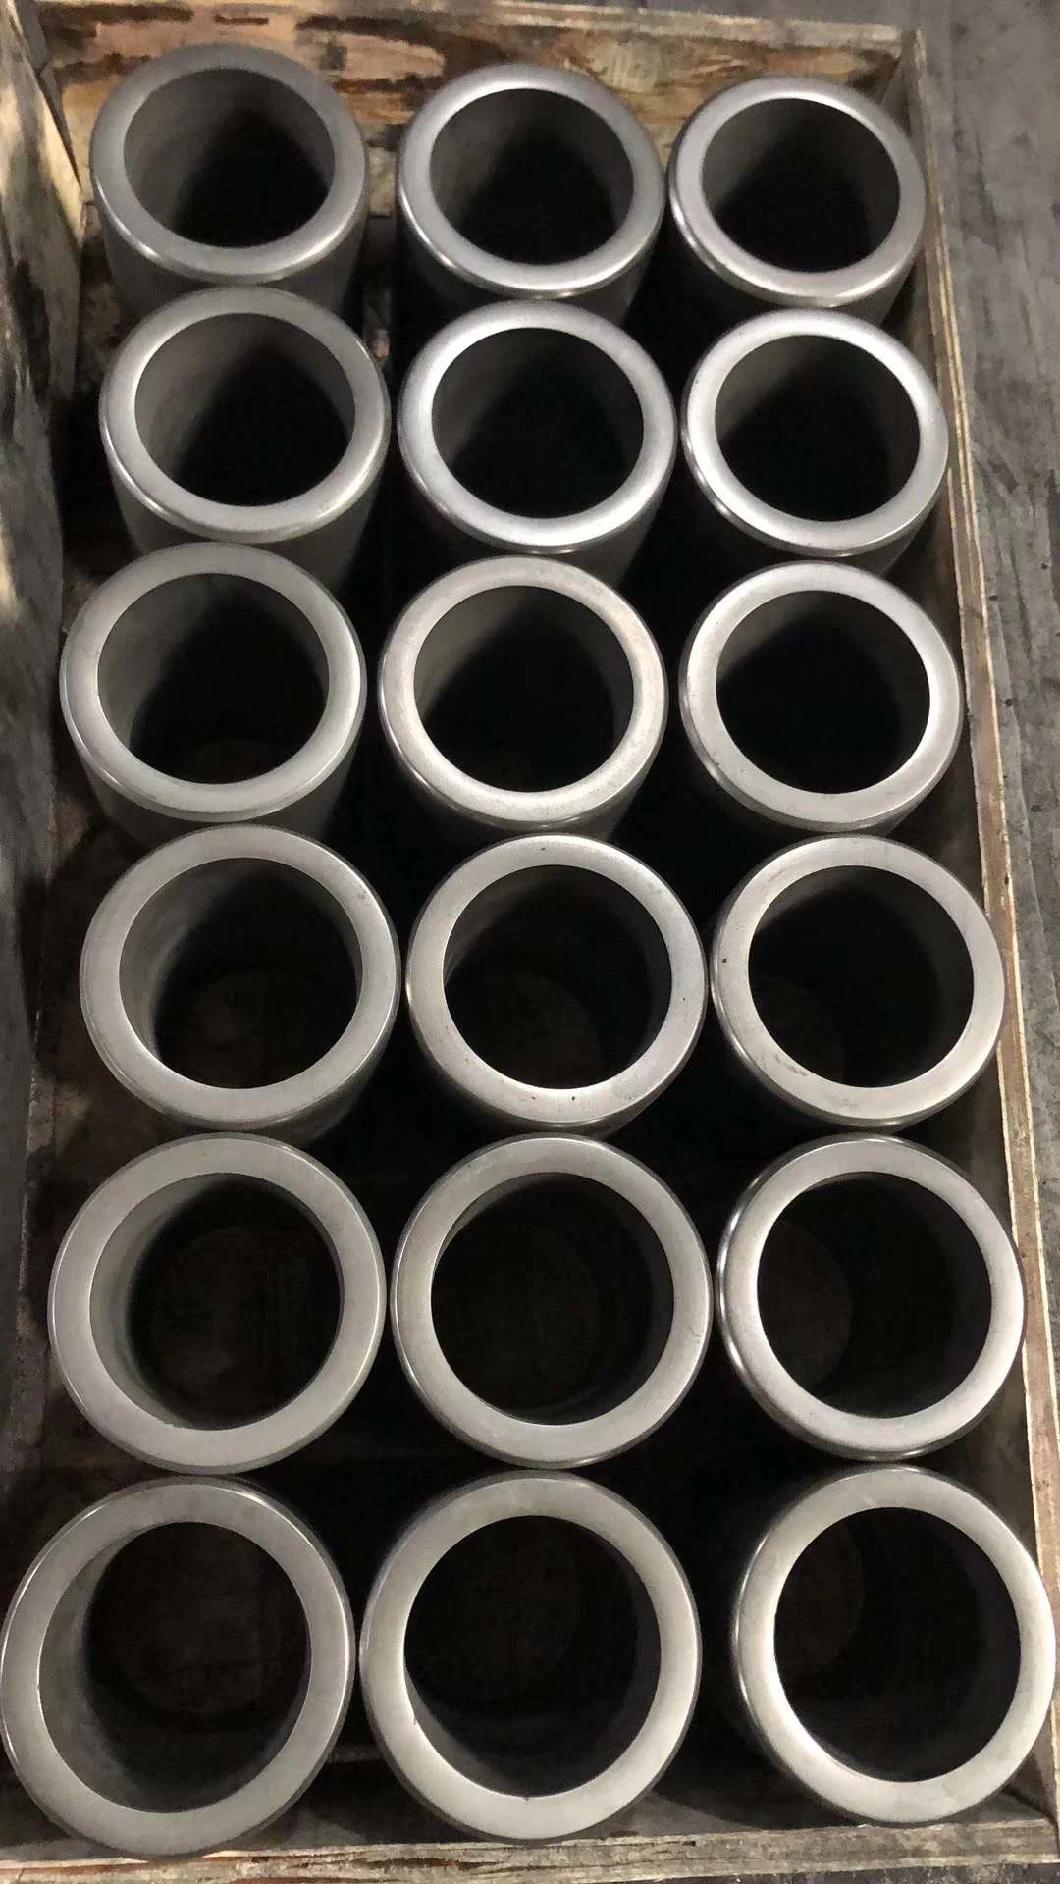 Density 1.91g Graphite Mold with Coating for Brass Casting